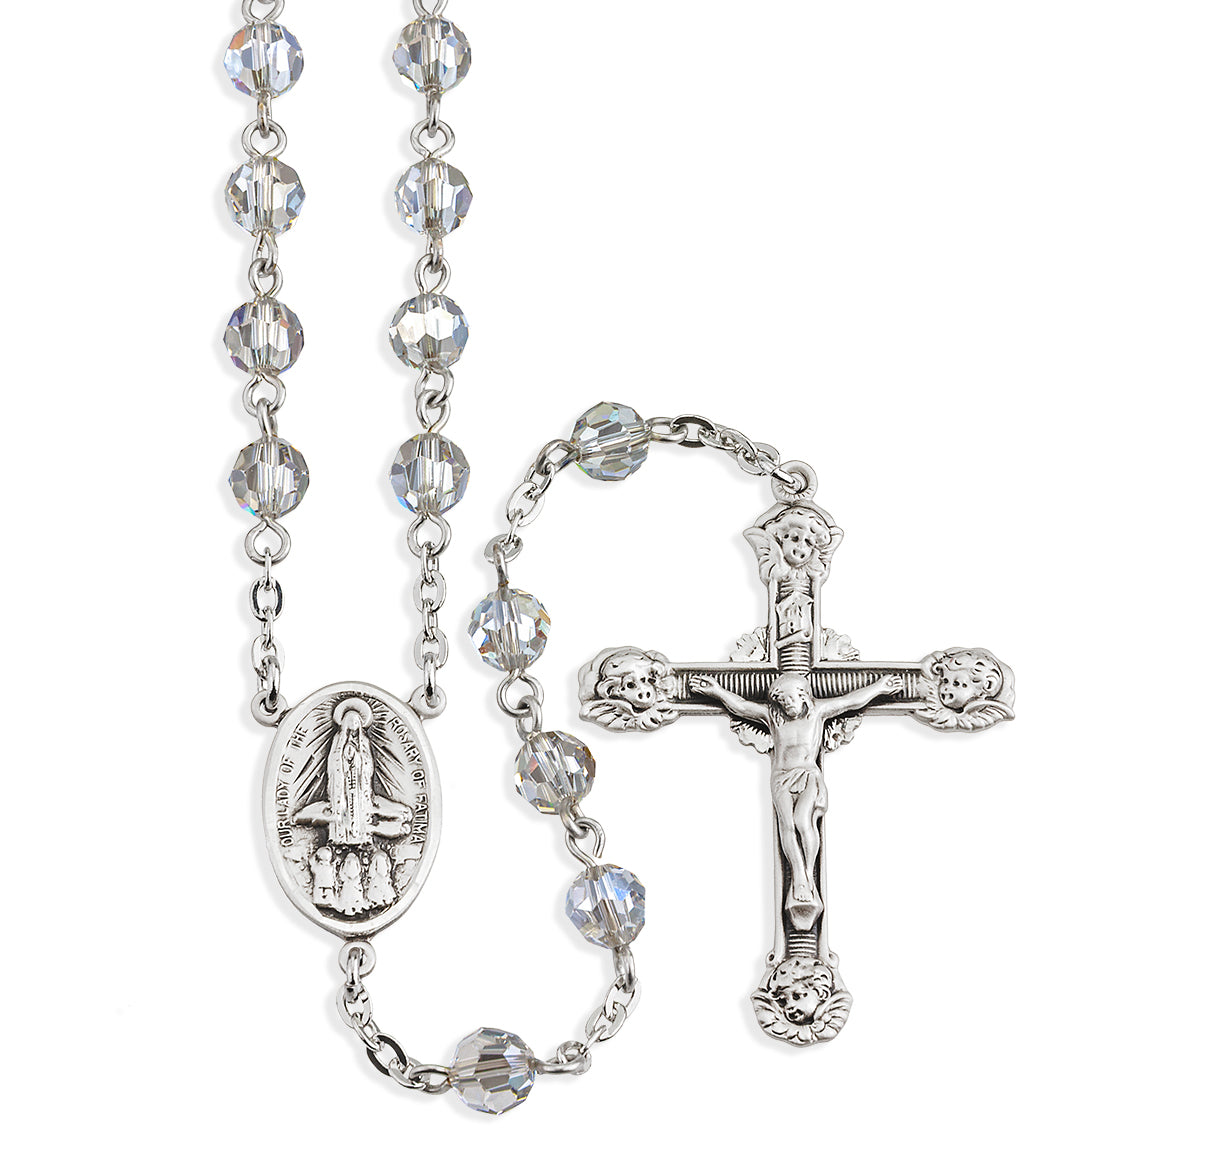 Sterling Silver Rosary Hand Made with Swarovski Crystal 6mm Smoked Faceted Round Beads by HMH